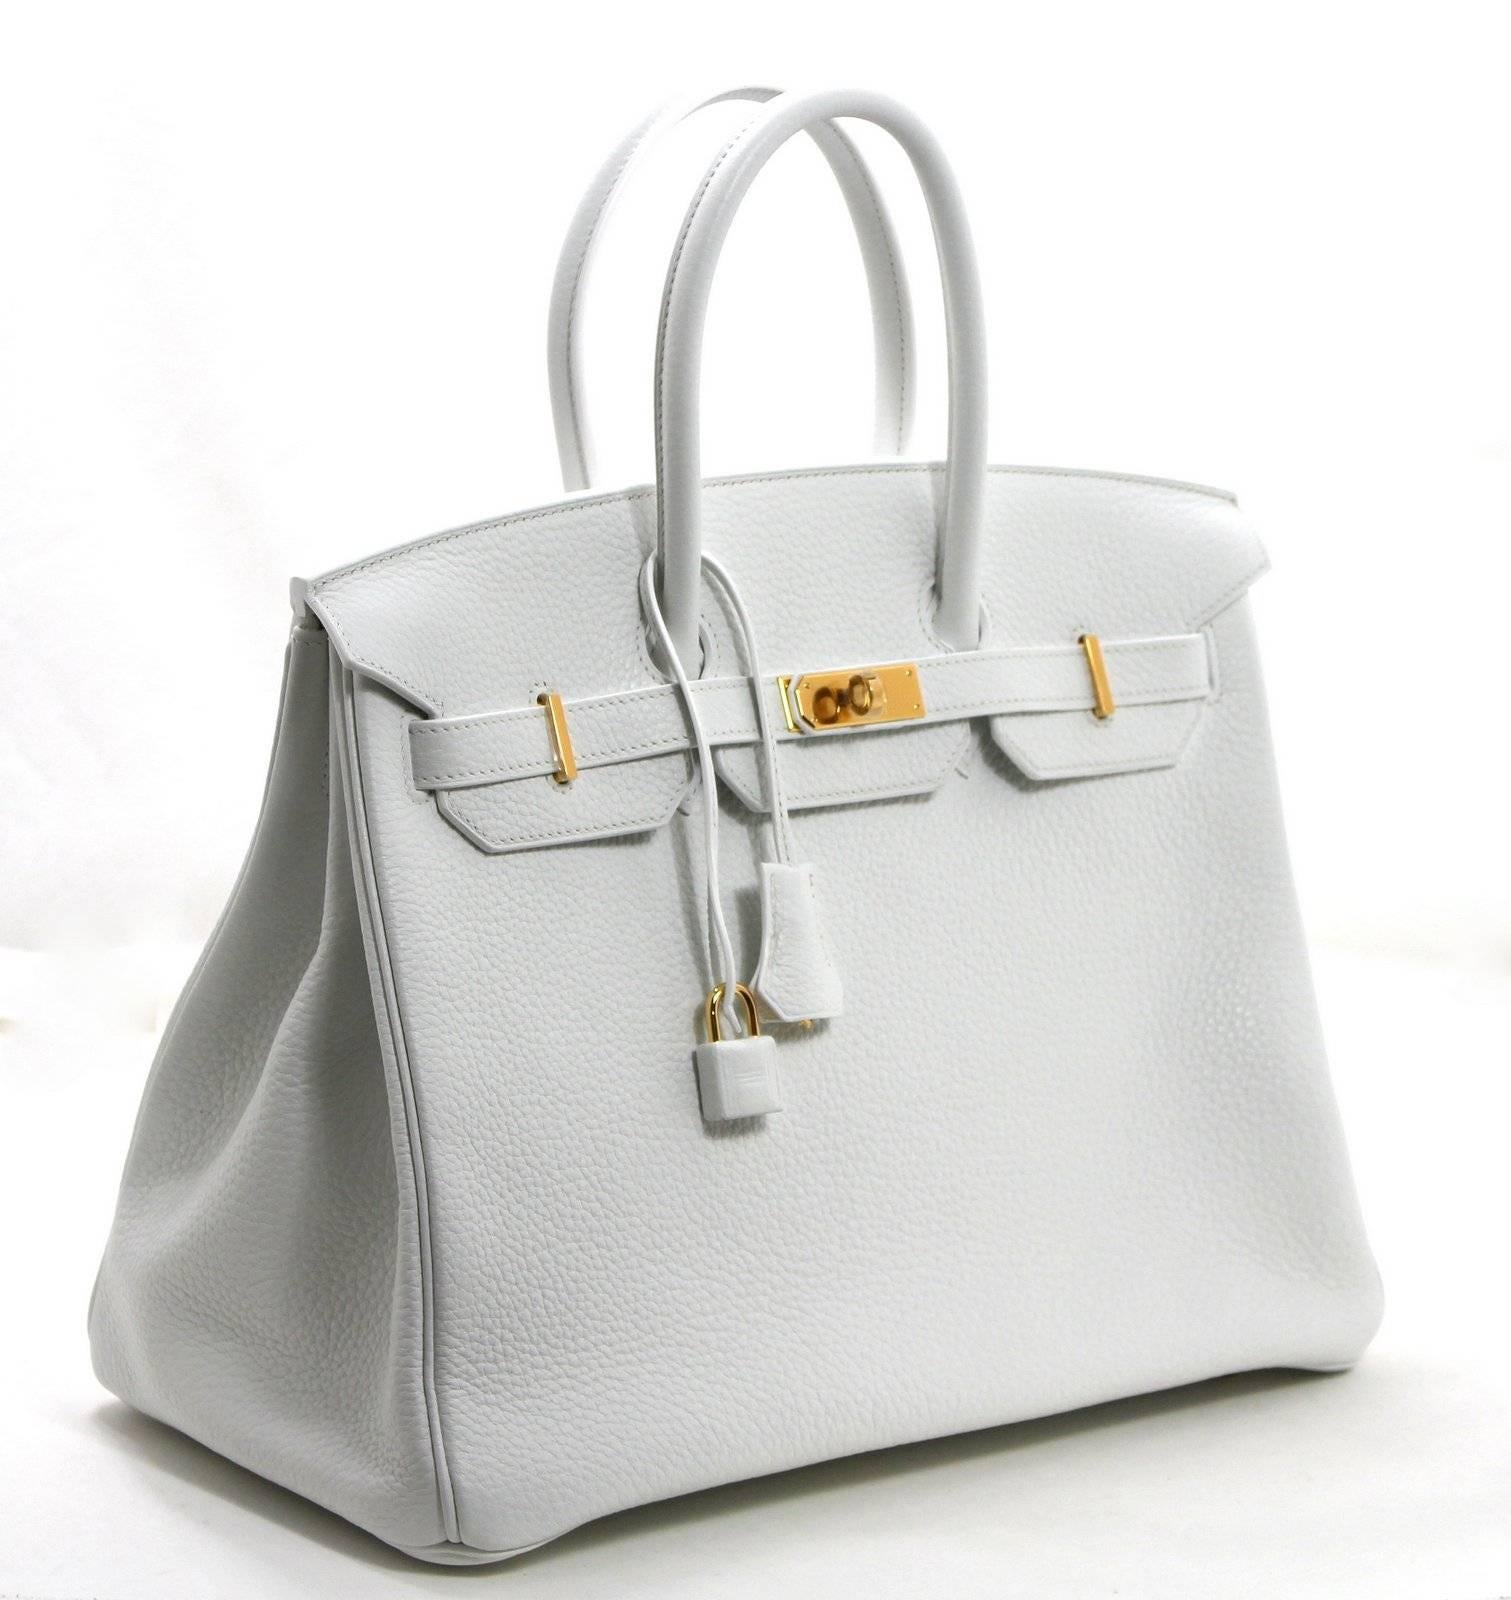 Hermès White Clemence Leather 35 cm Birkin, T stamp, Gold Hardware- NEVER CARRIED. Plastic on all hardware.
Nearly impossible to get, the handcrafted White Birkin is elusive and highly desirable.  The penultimate in luxury.  Only offered in